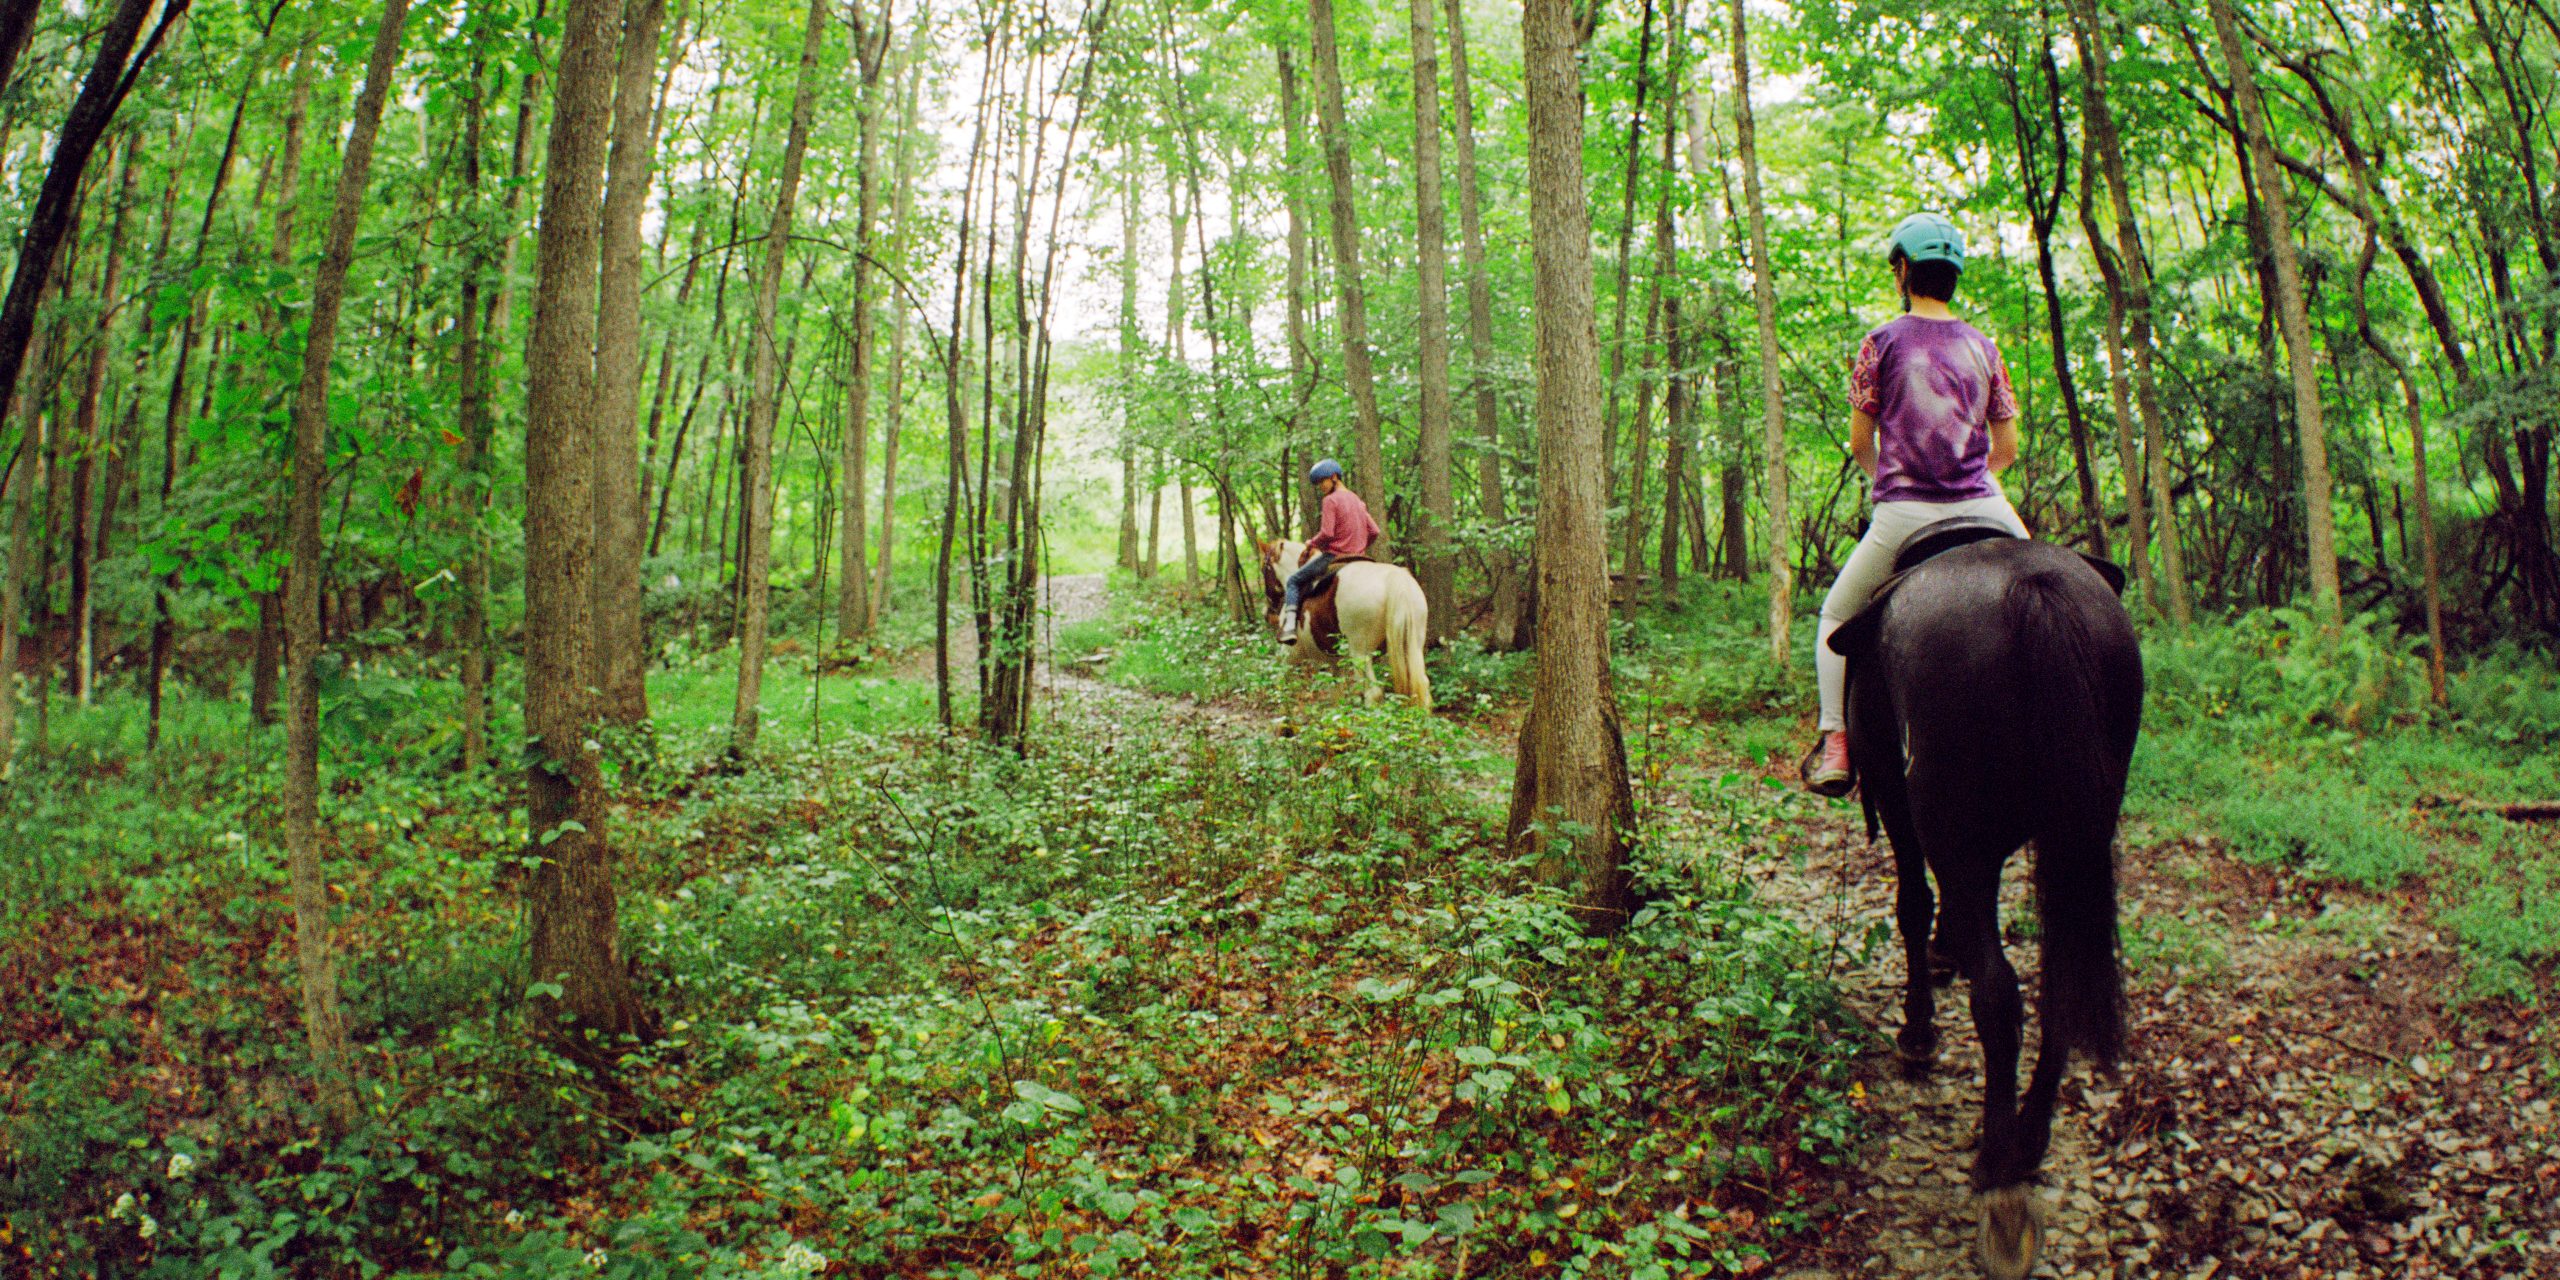 Horseback riding in the woods